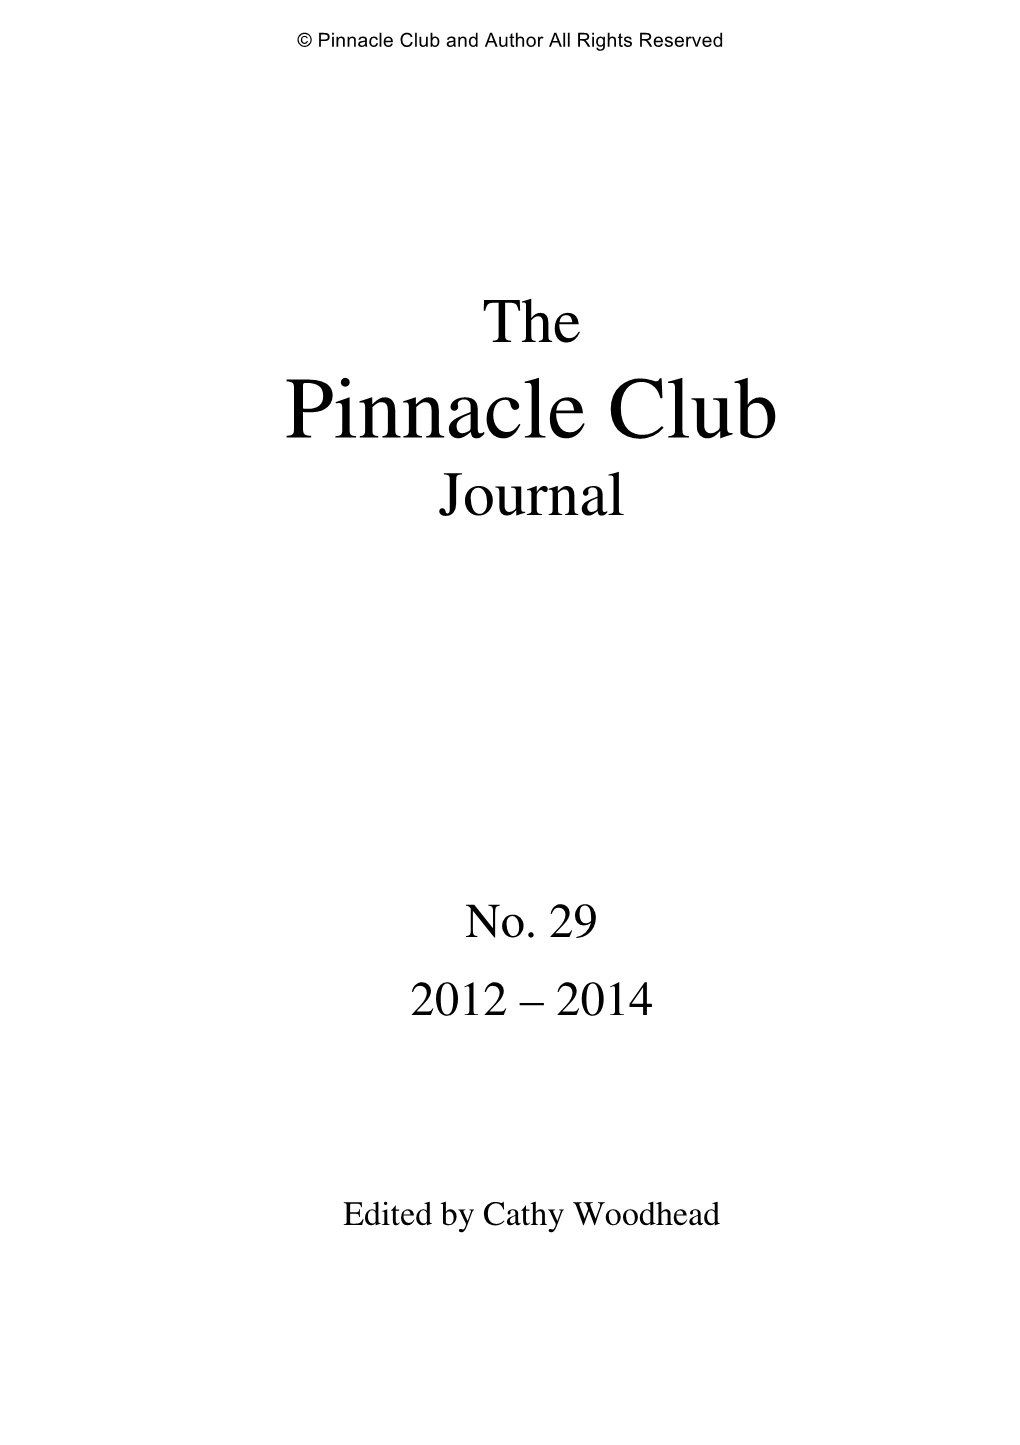 Pinnacle Club and Author All Rights Reserved